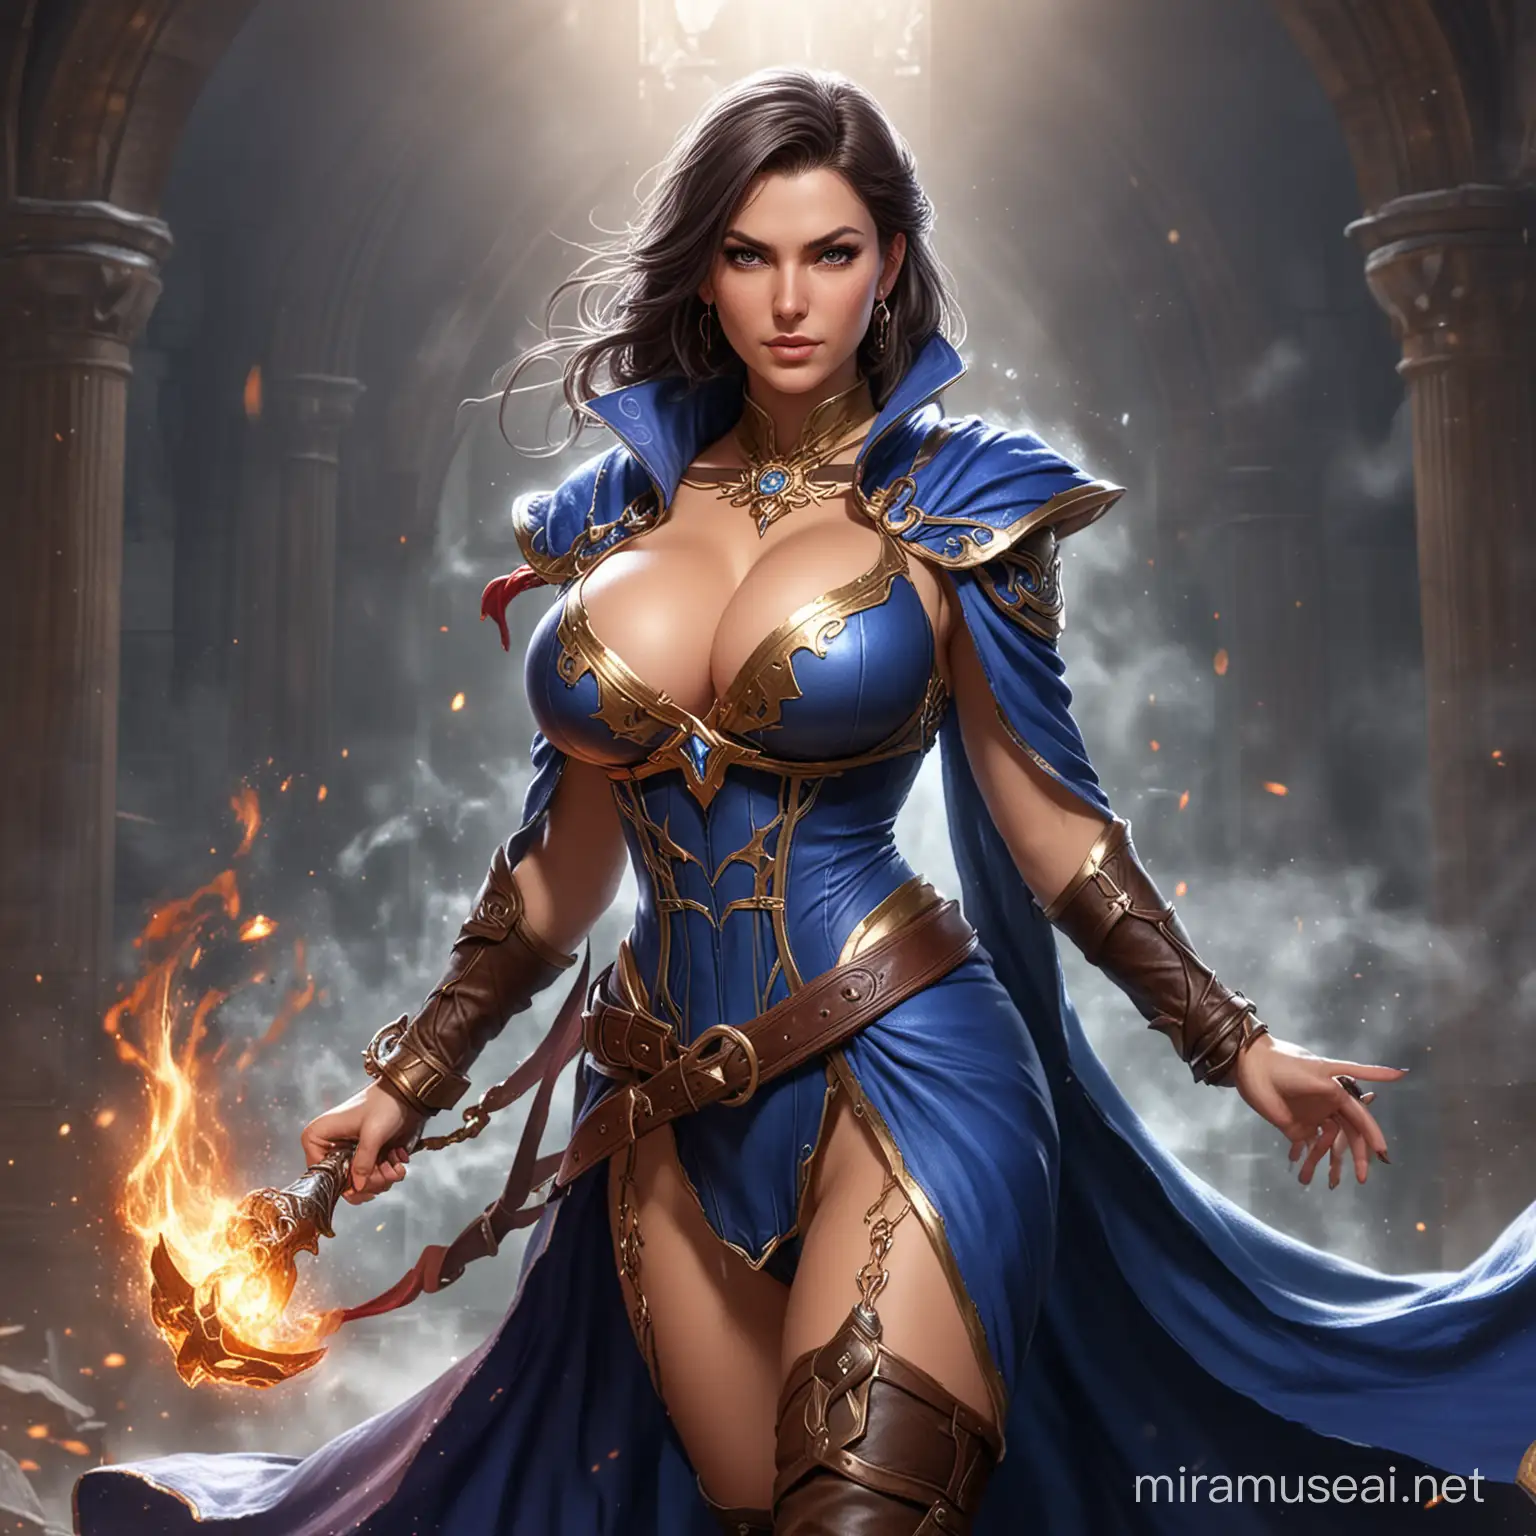 Powerful Female Mage in Busty Attire Standing Tall